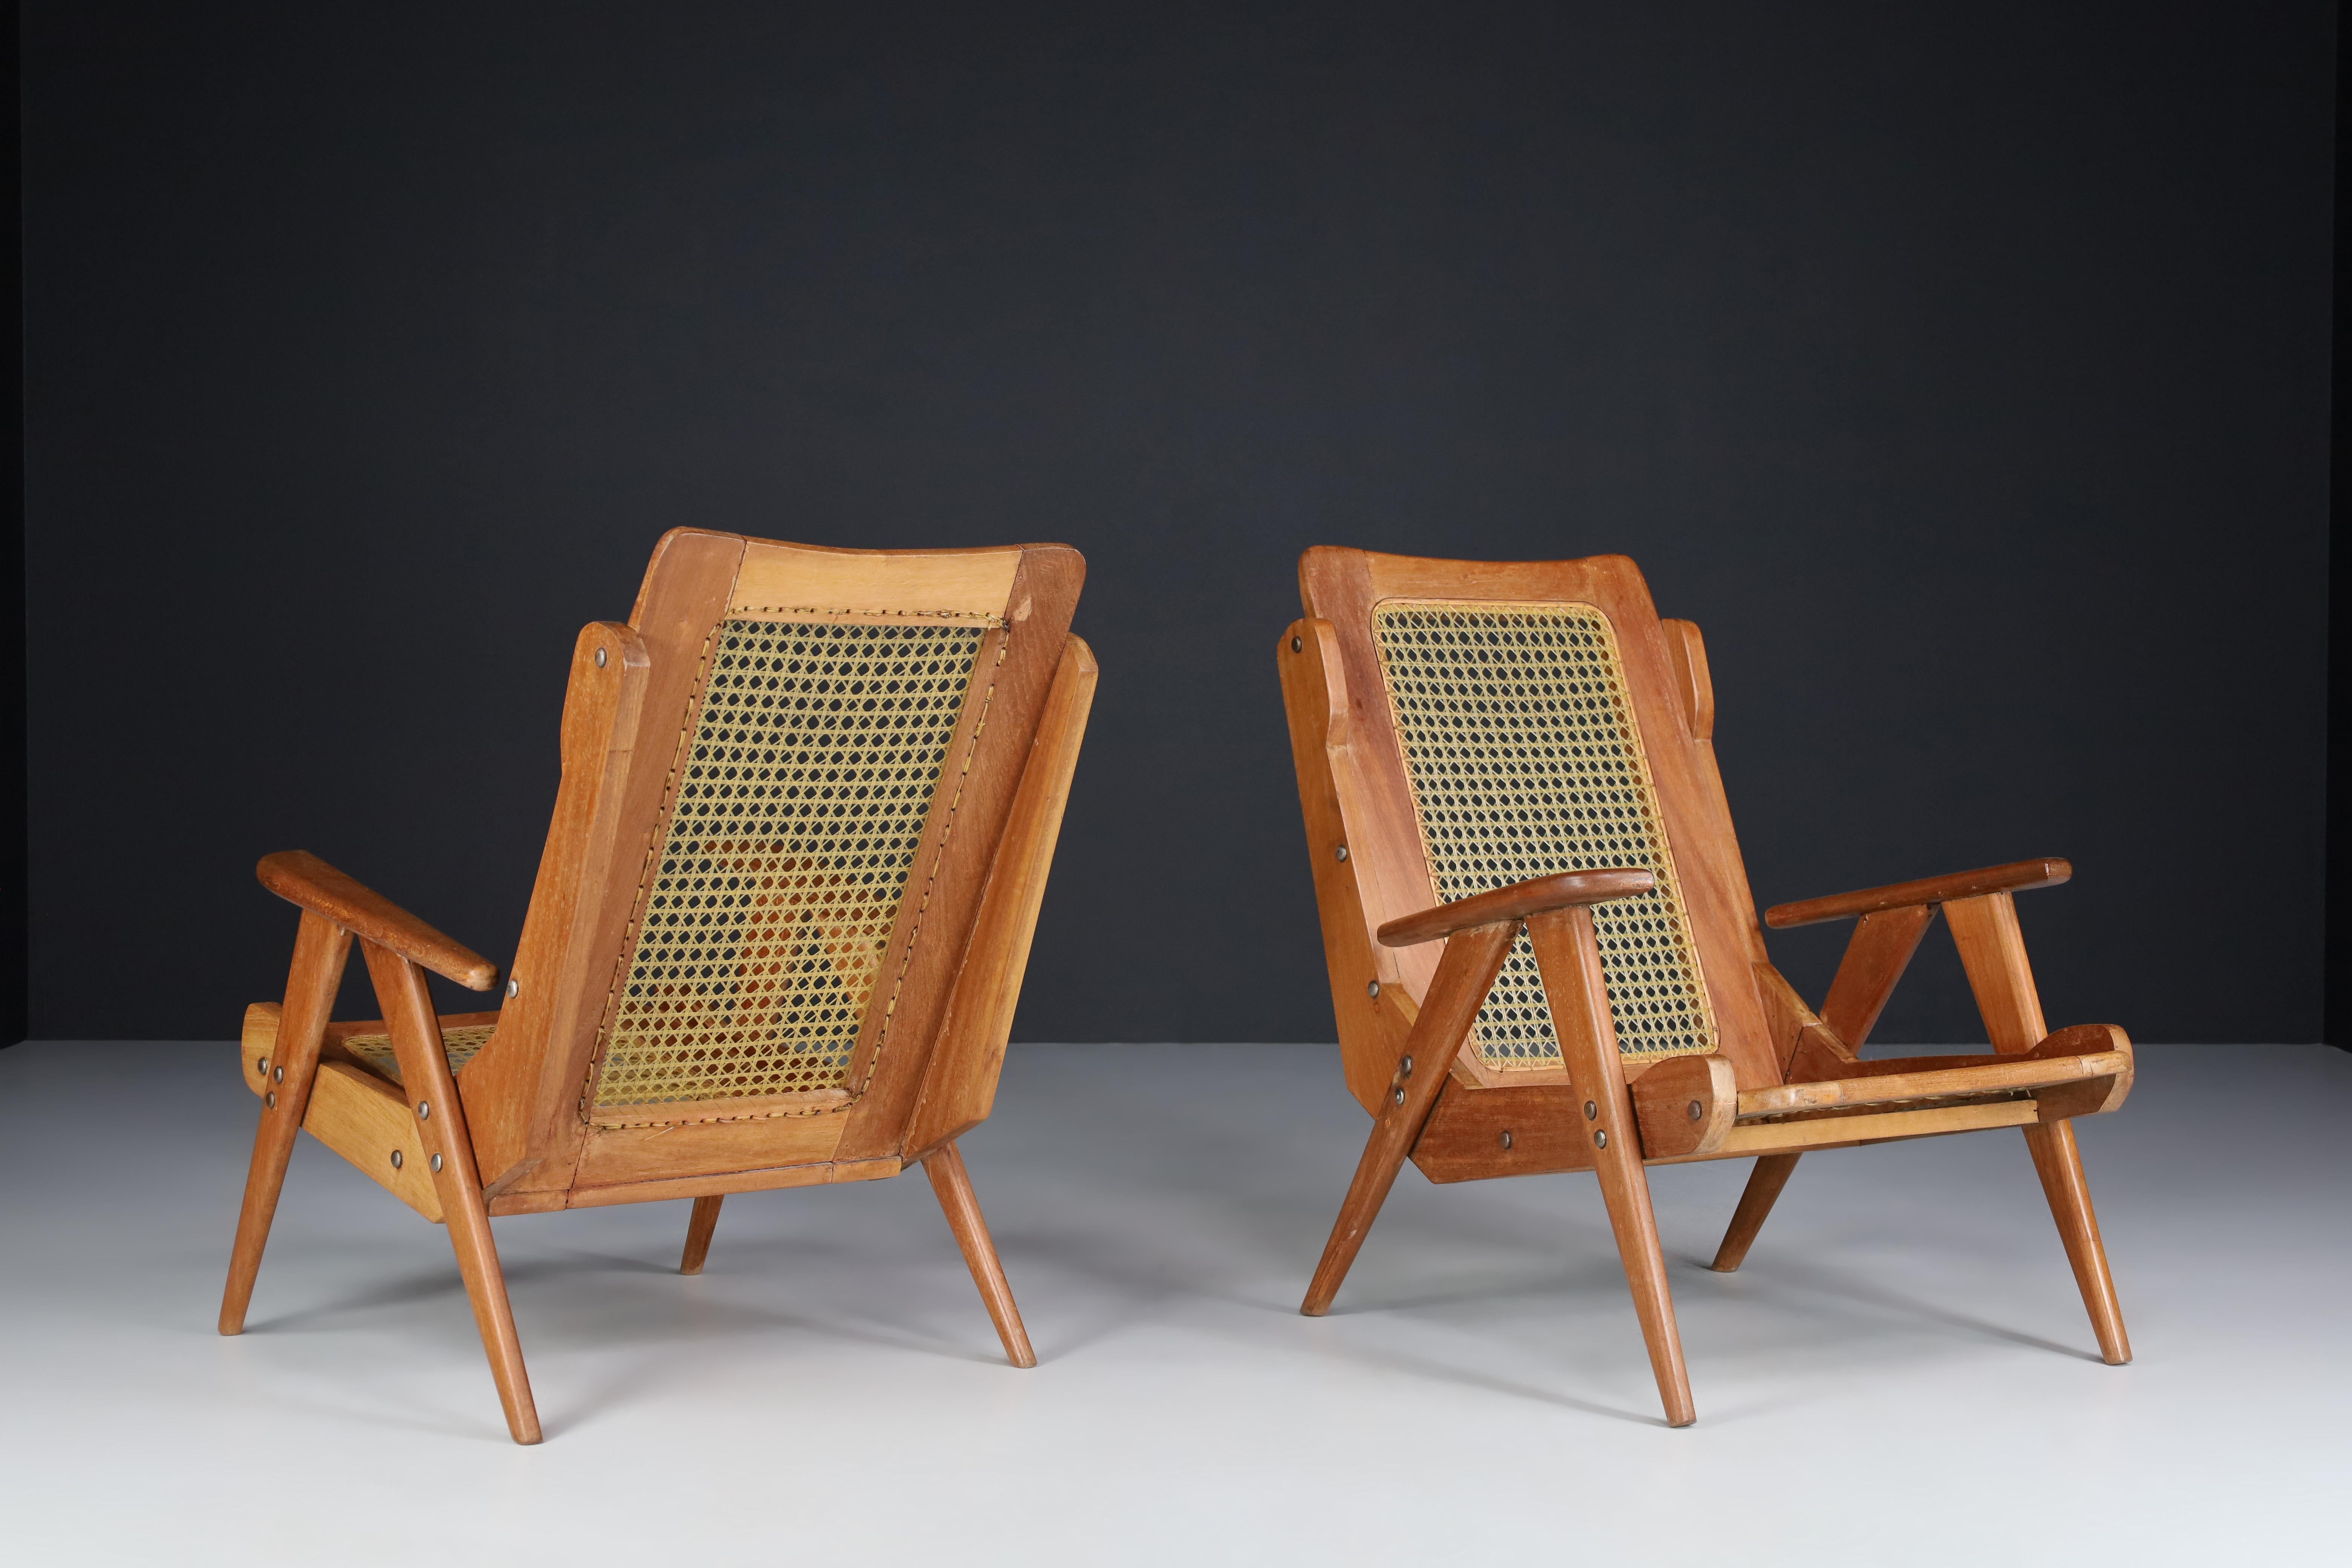 French lounge chairs with teak structure and Webbing , France 1950s

This mid-century French arm chairs / lounge chairs combines a visually stunning structural body with expert caning technique and high-quality materials. From all sides, this